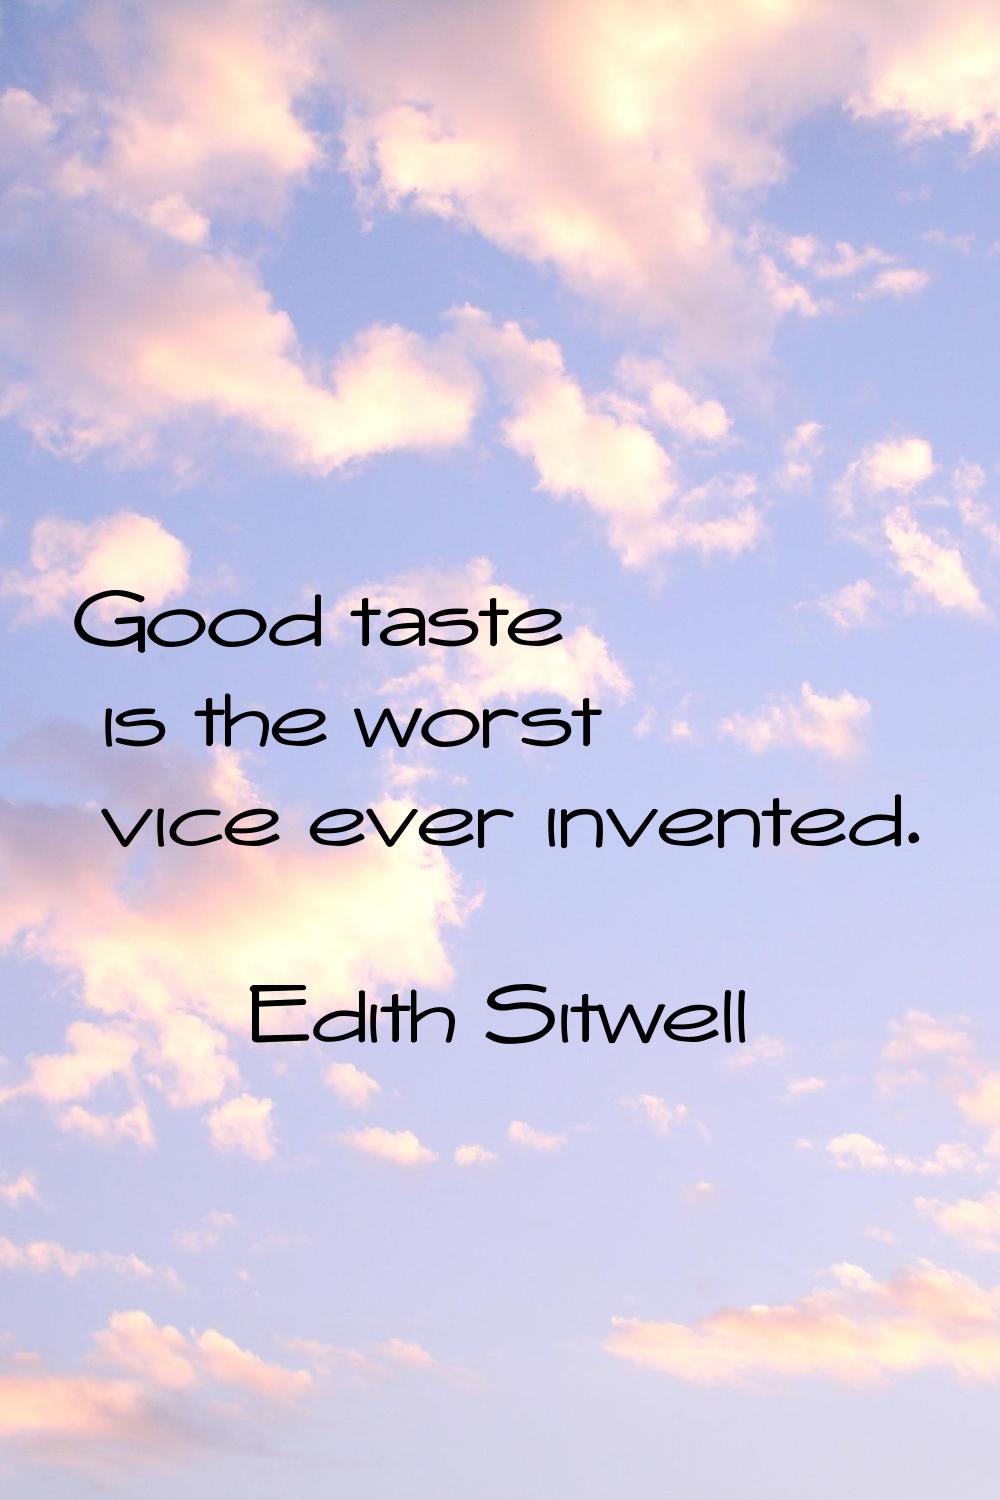 Good taste is the worst vice ever invented.